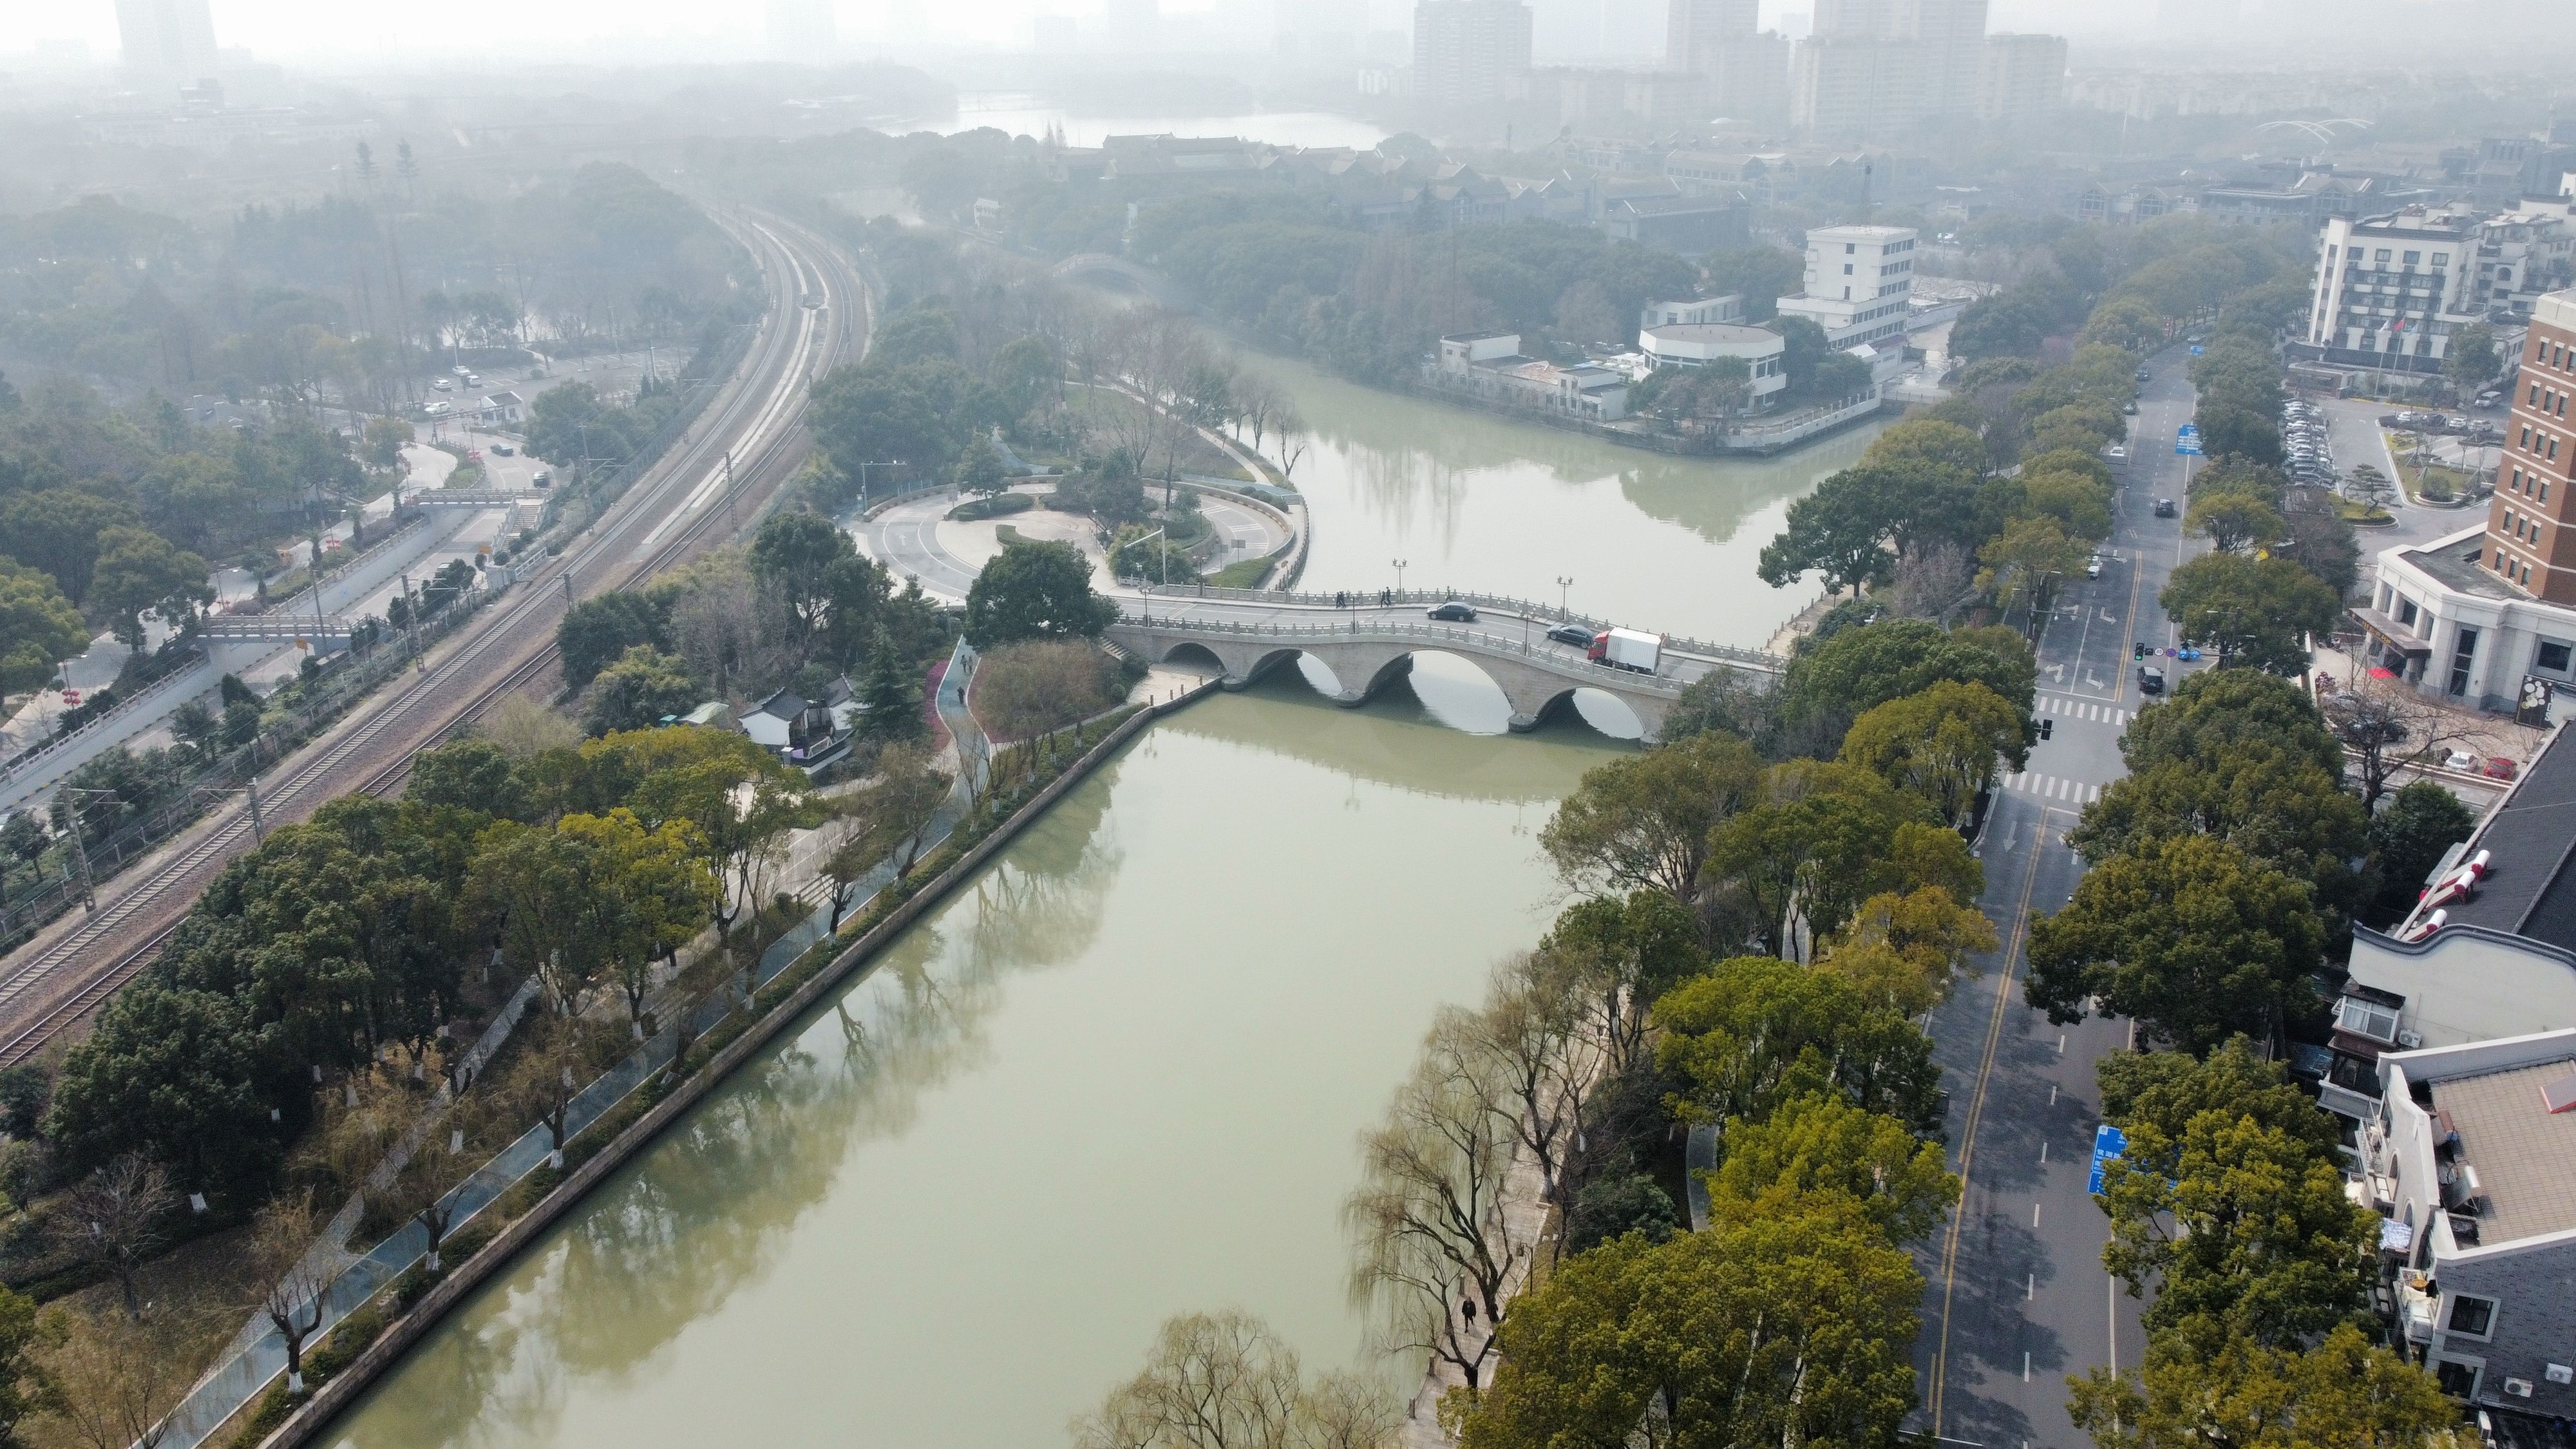 Jiaxing Ancient City Connecting South Lake International Concept Design Competition on Footbridge Crossing Huancheng River and Railway. Aerial photo